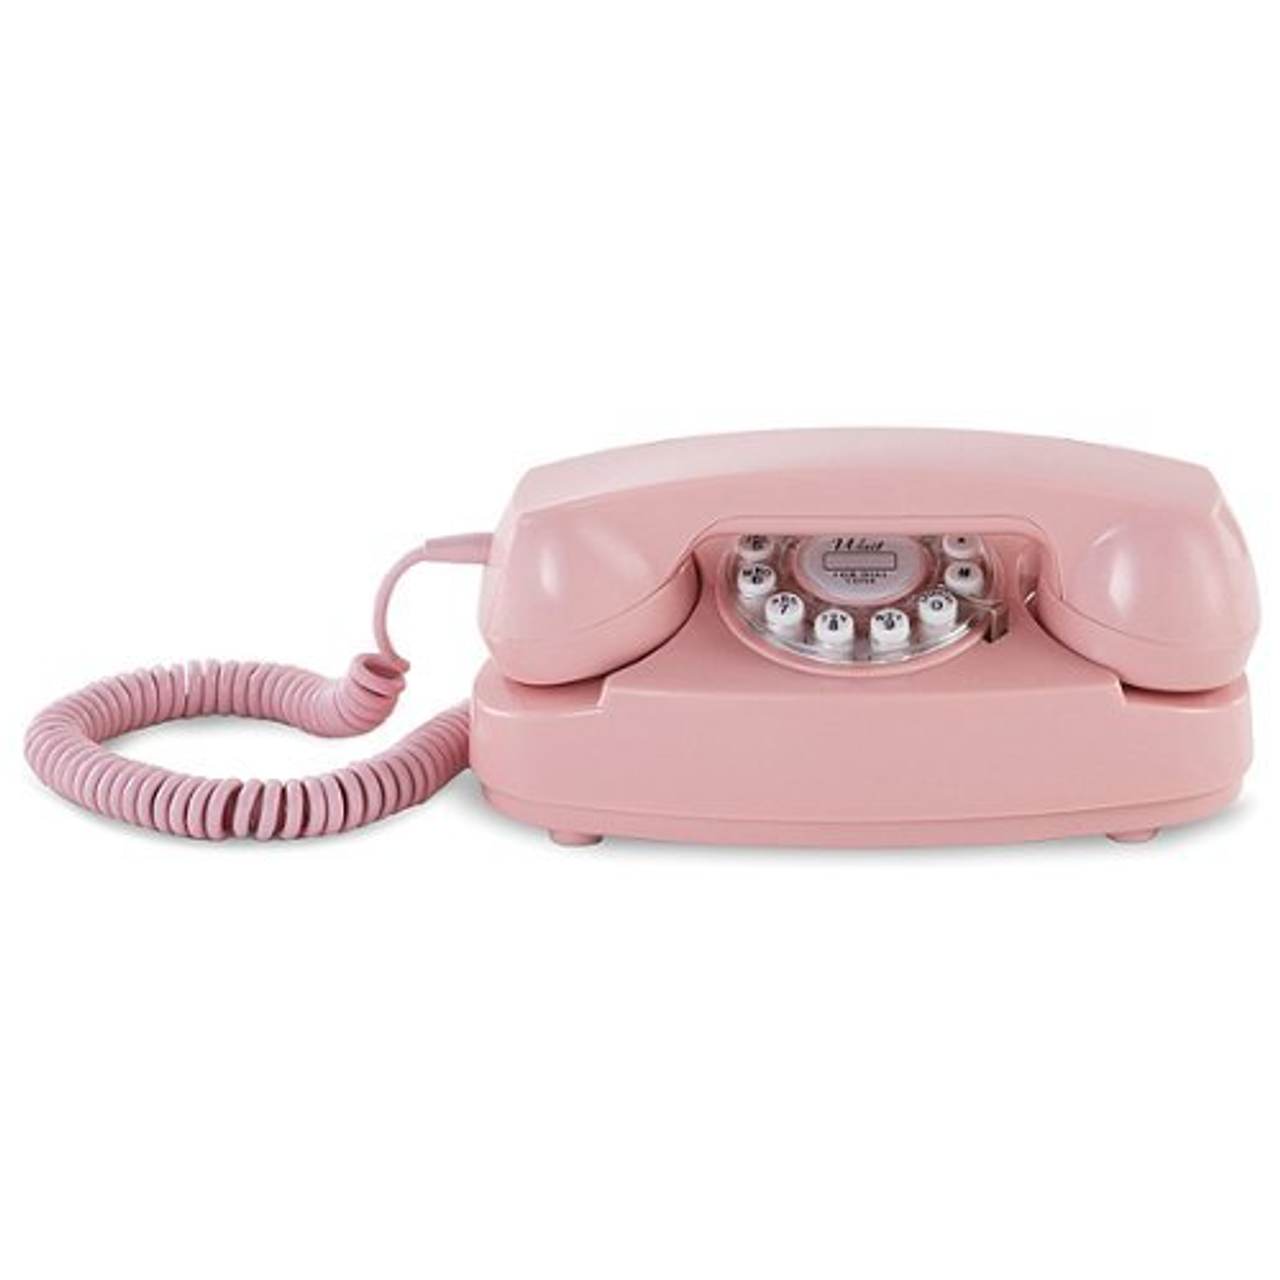 Ooma - Retro Princess Dial Phone with Home Phone Service and $50 International Credit - Pink